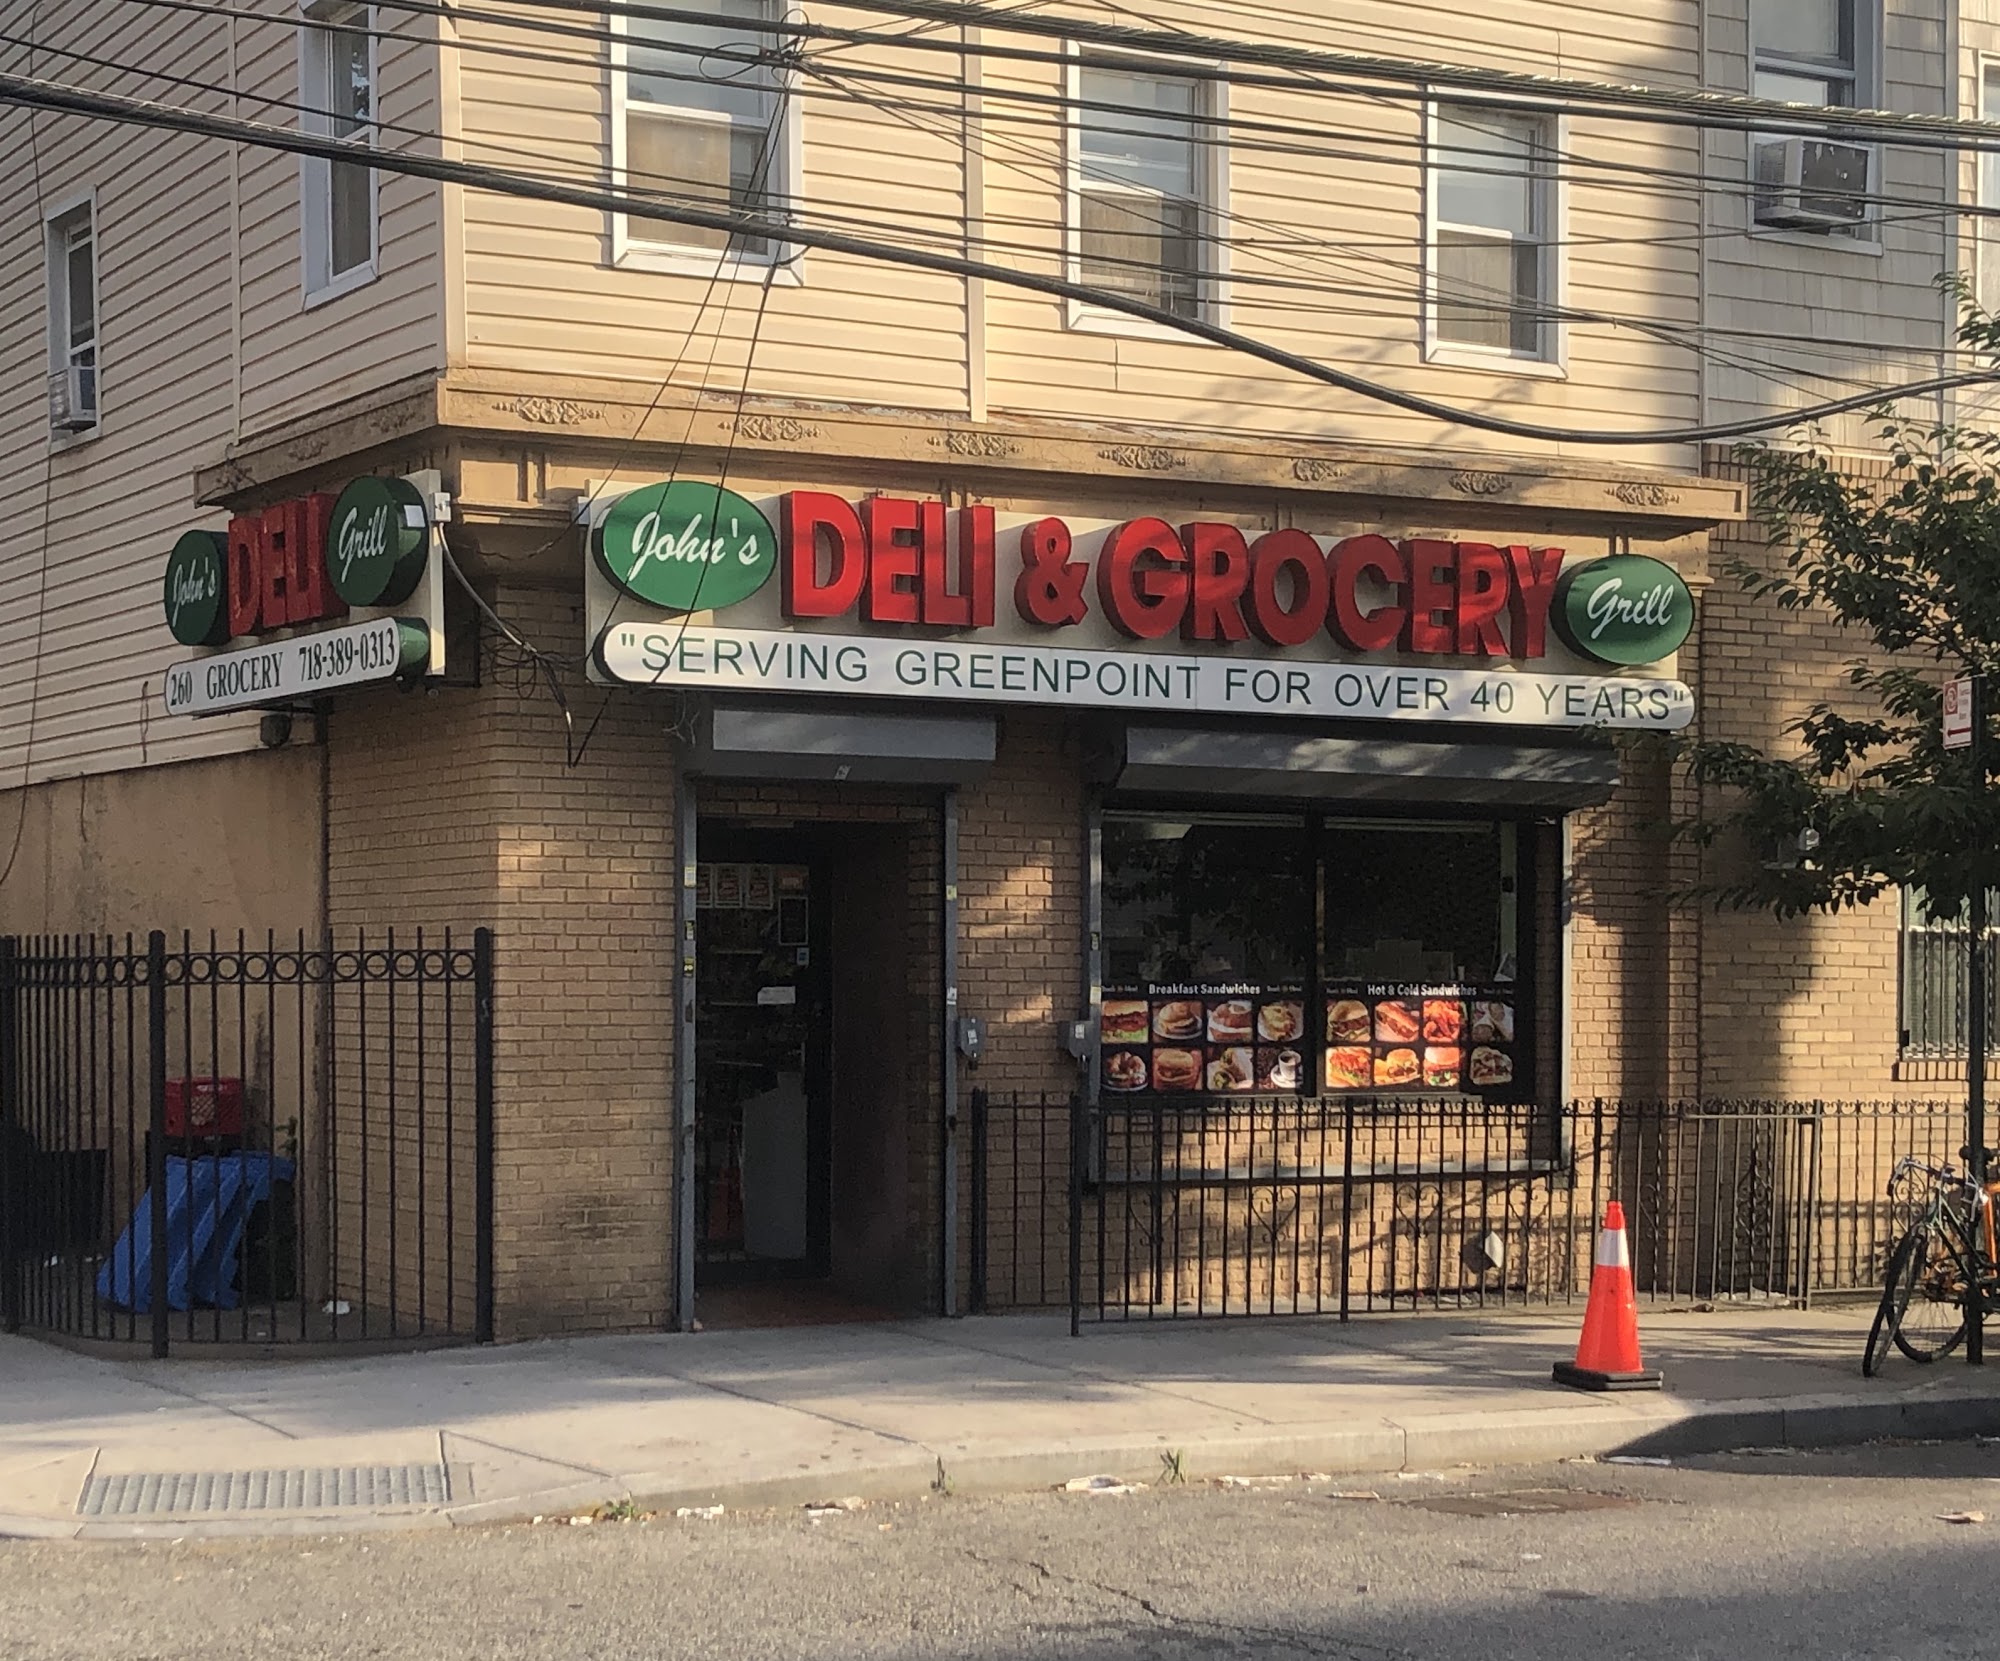 John's Deli and Grocery